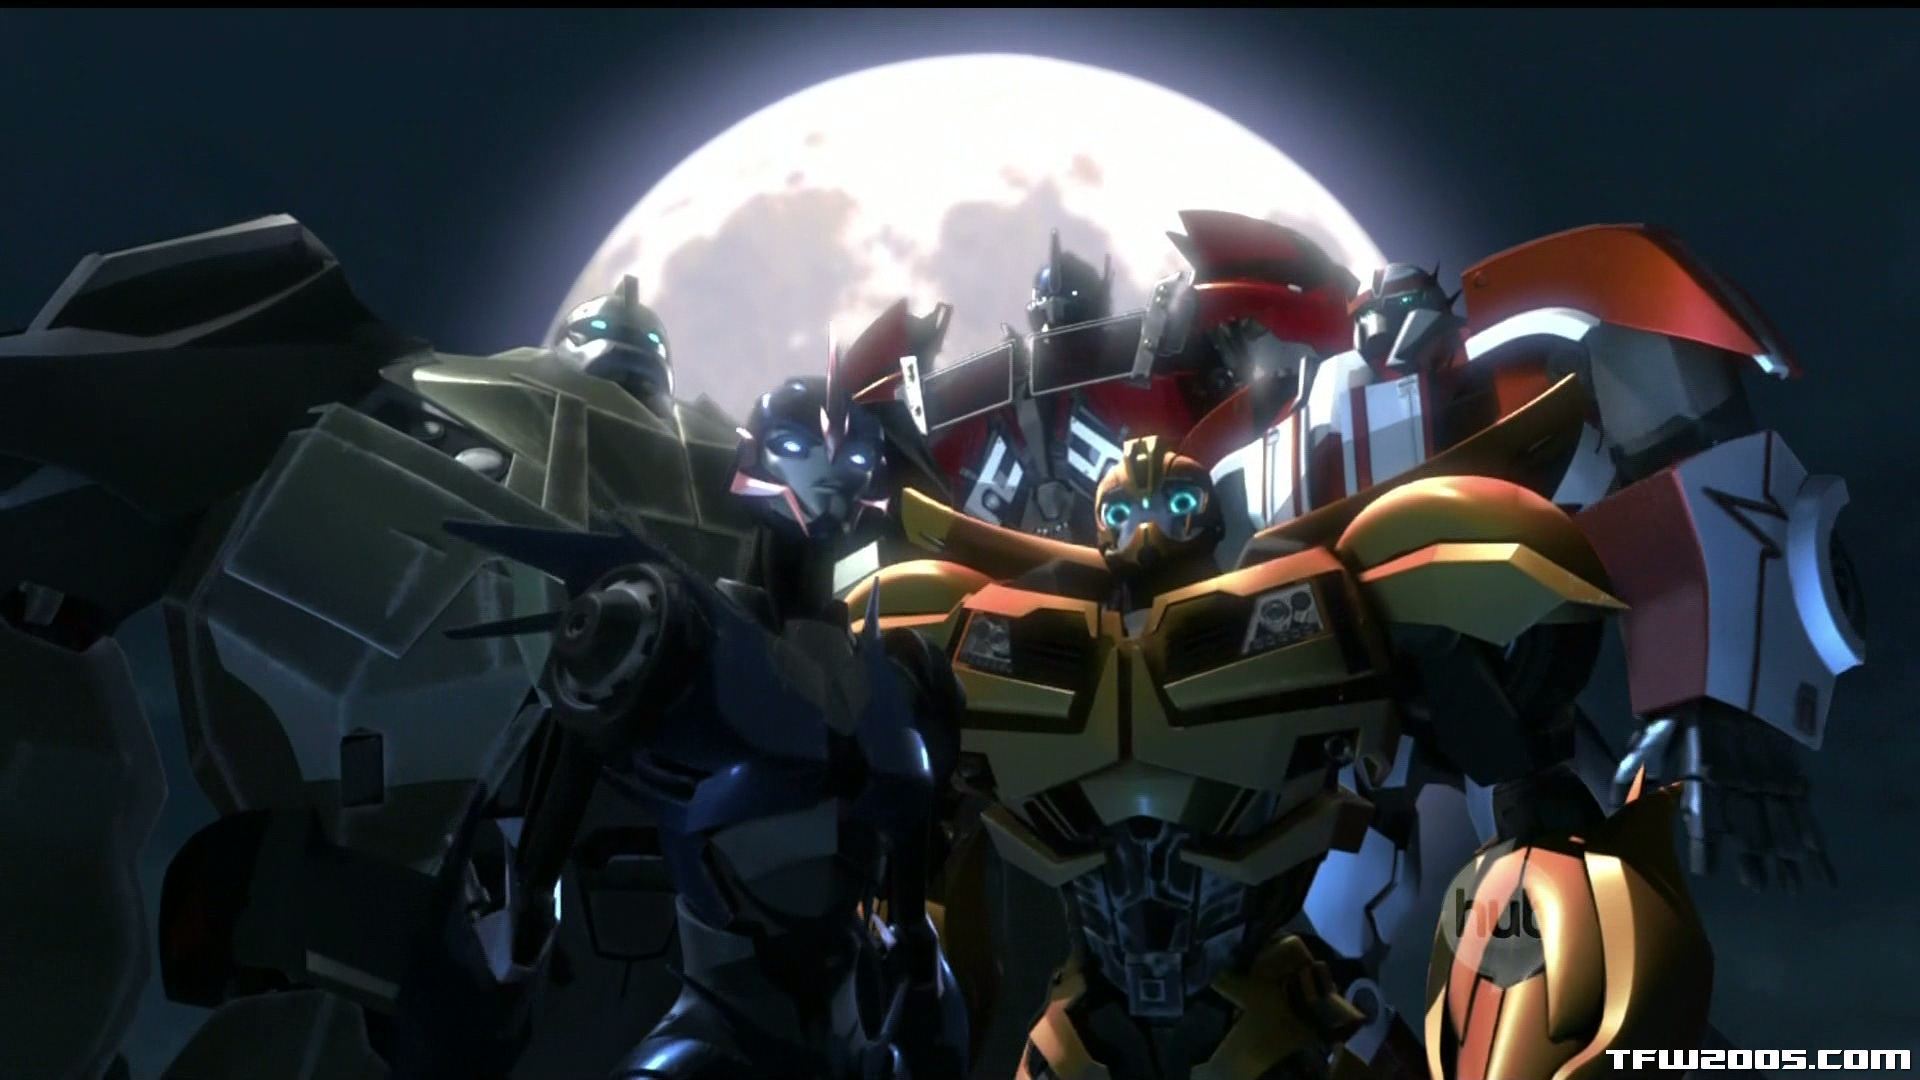 Transformers Prime images Transformers Prime the animated